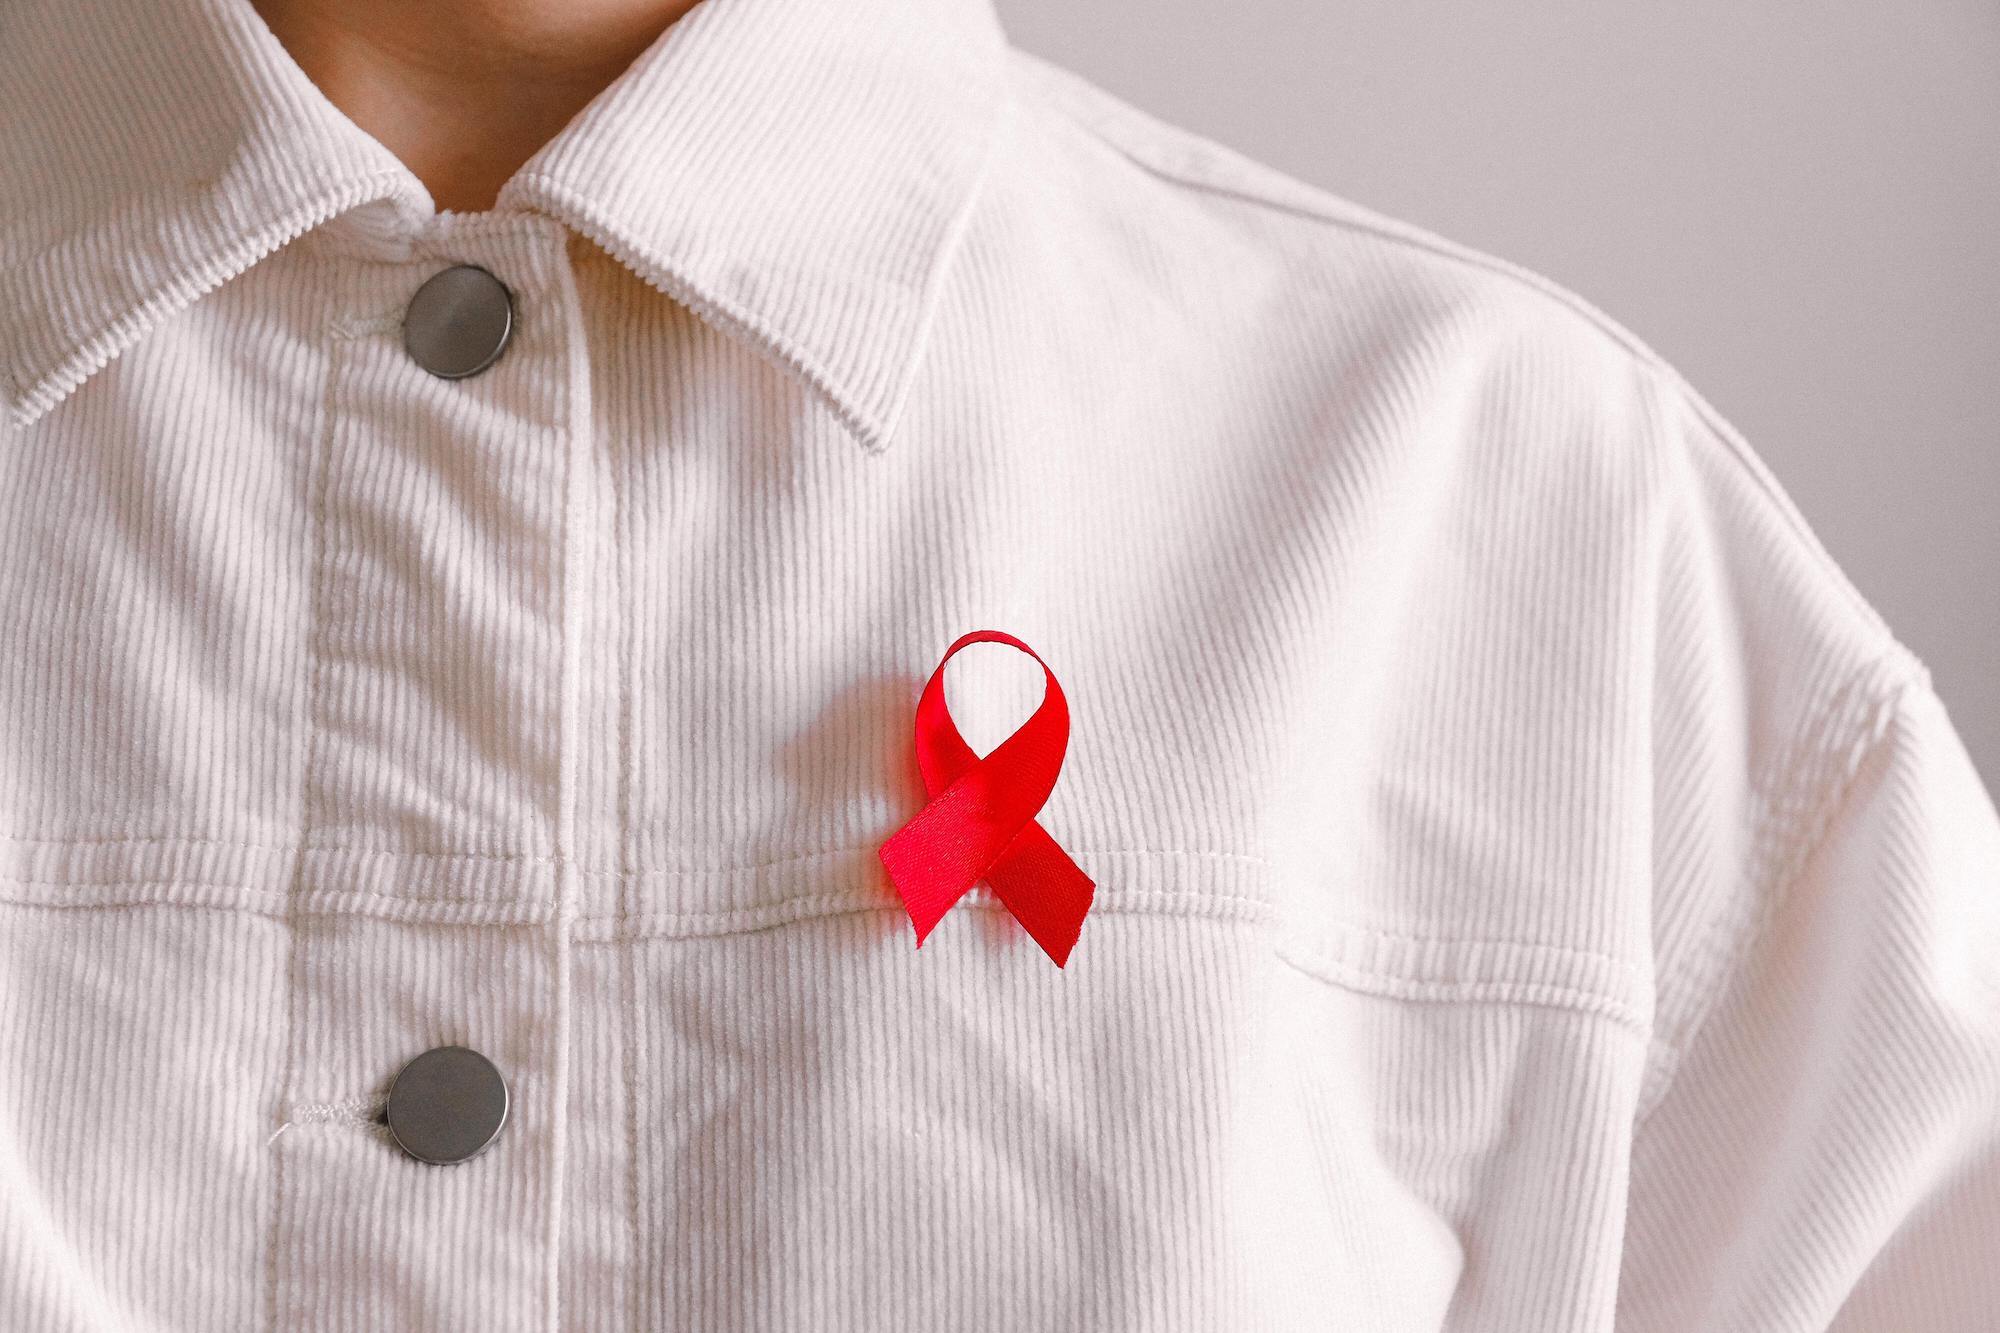 The United States Has the Highest Number of People With HIV/Aids at Over 1 Million